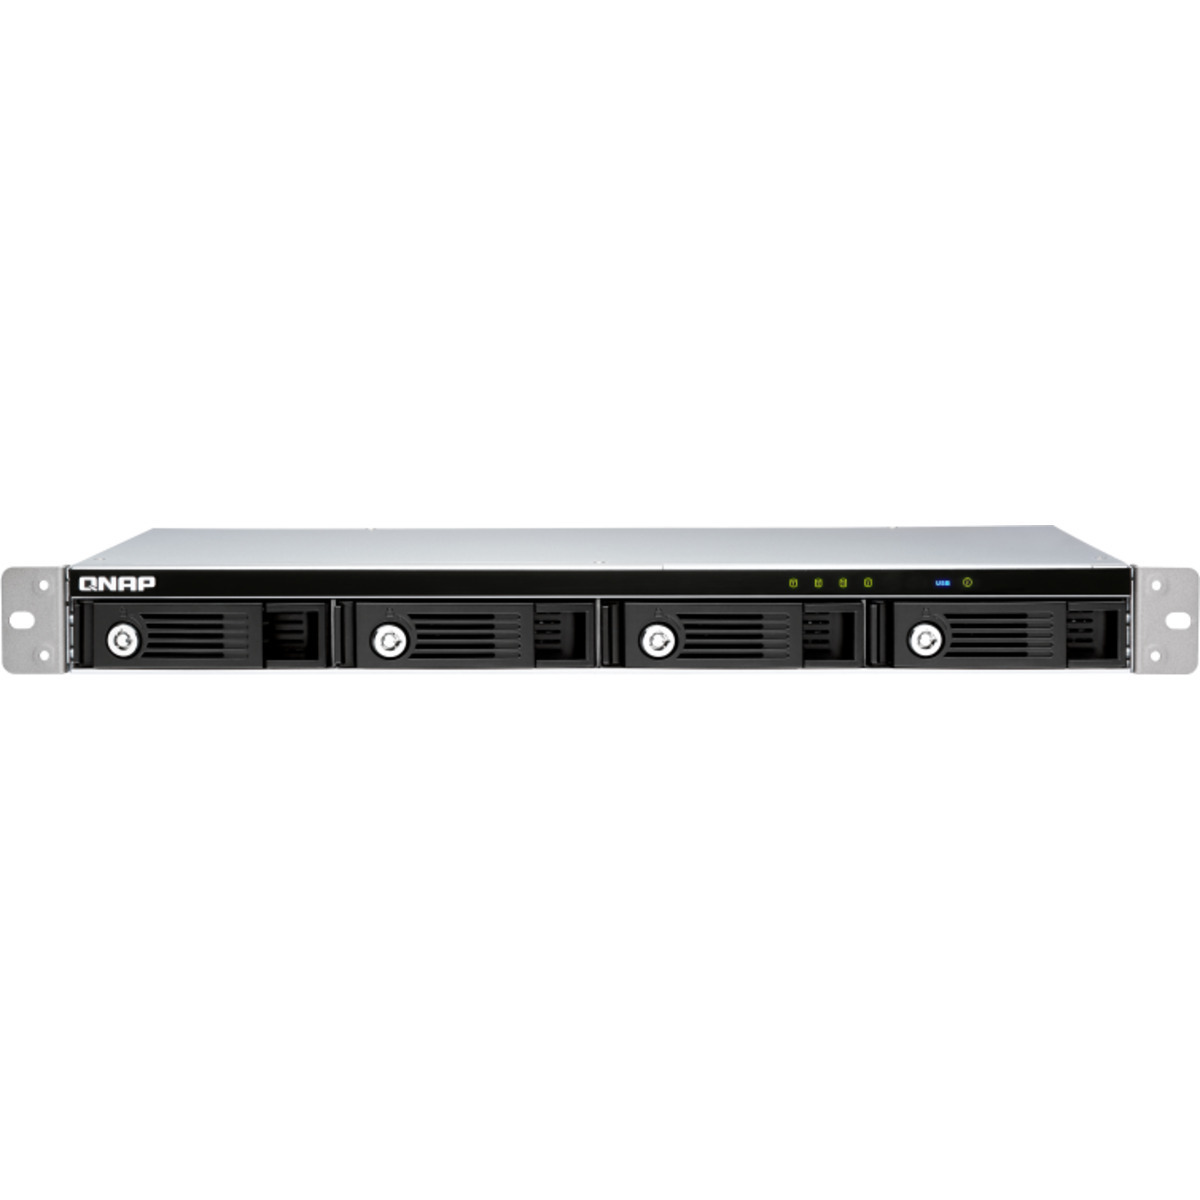 QNAP TR-004U External Expansion Drive 1.5tb 4-Bay RackMount Multimedia / Power User / Business Expansion Enclosure 3x500gb Crucial MX500 CT500MX500SSD1 2.5 560/510MB/s SATA 6Gb/s SSD CONSUMER Class Drives Installed - Burn-In Tested TR-004U External Expansion Drive